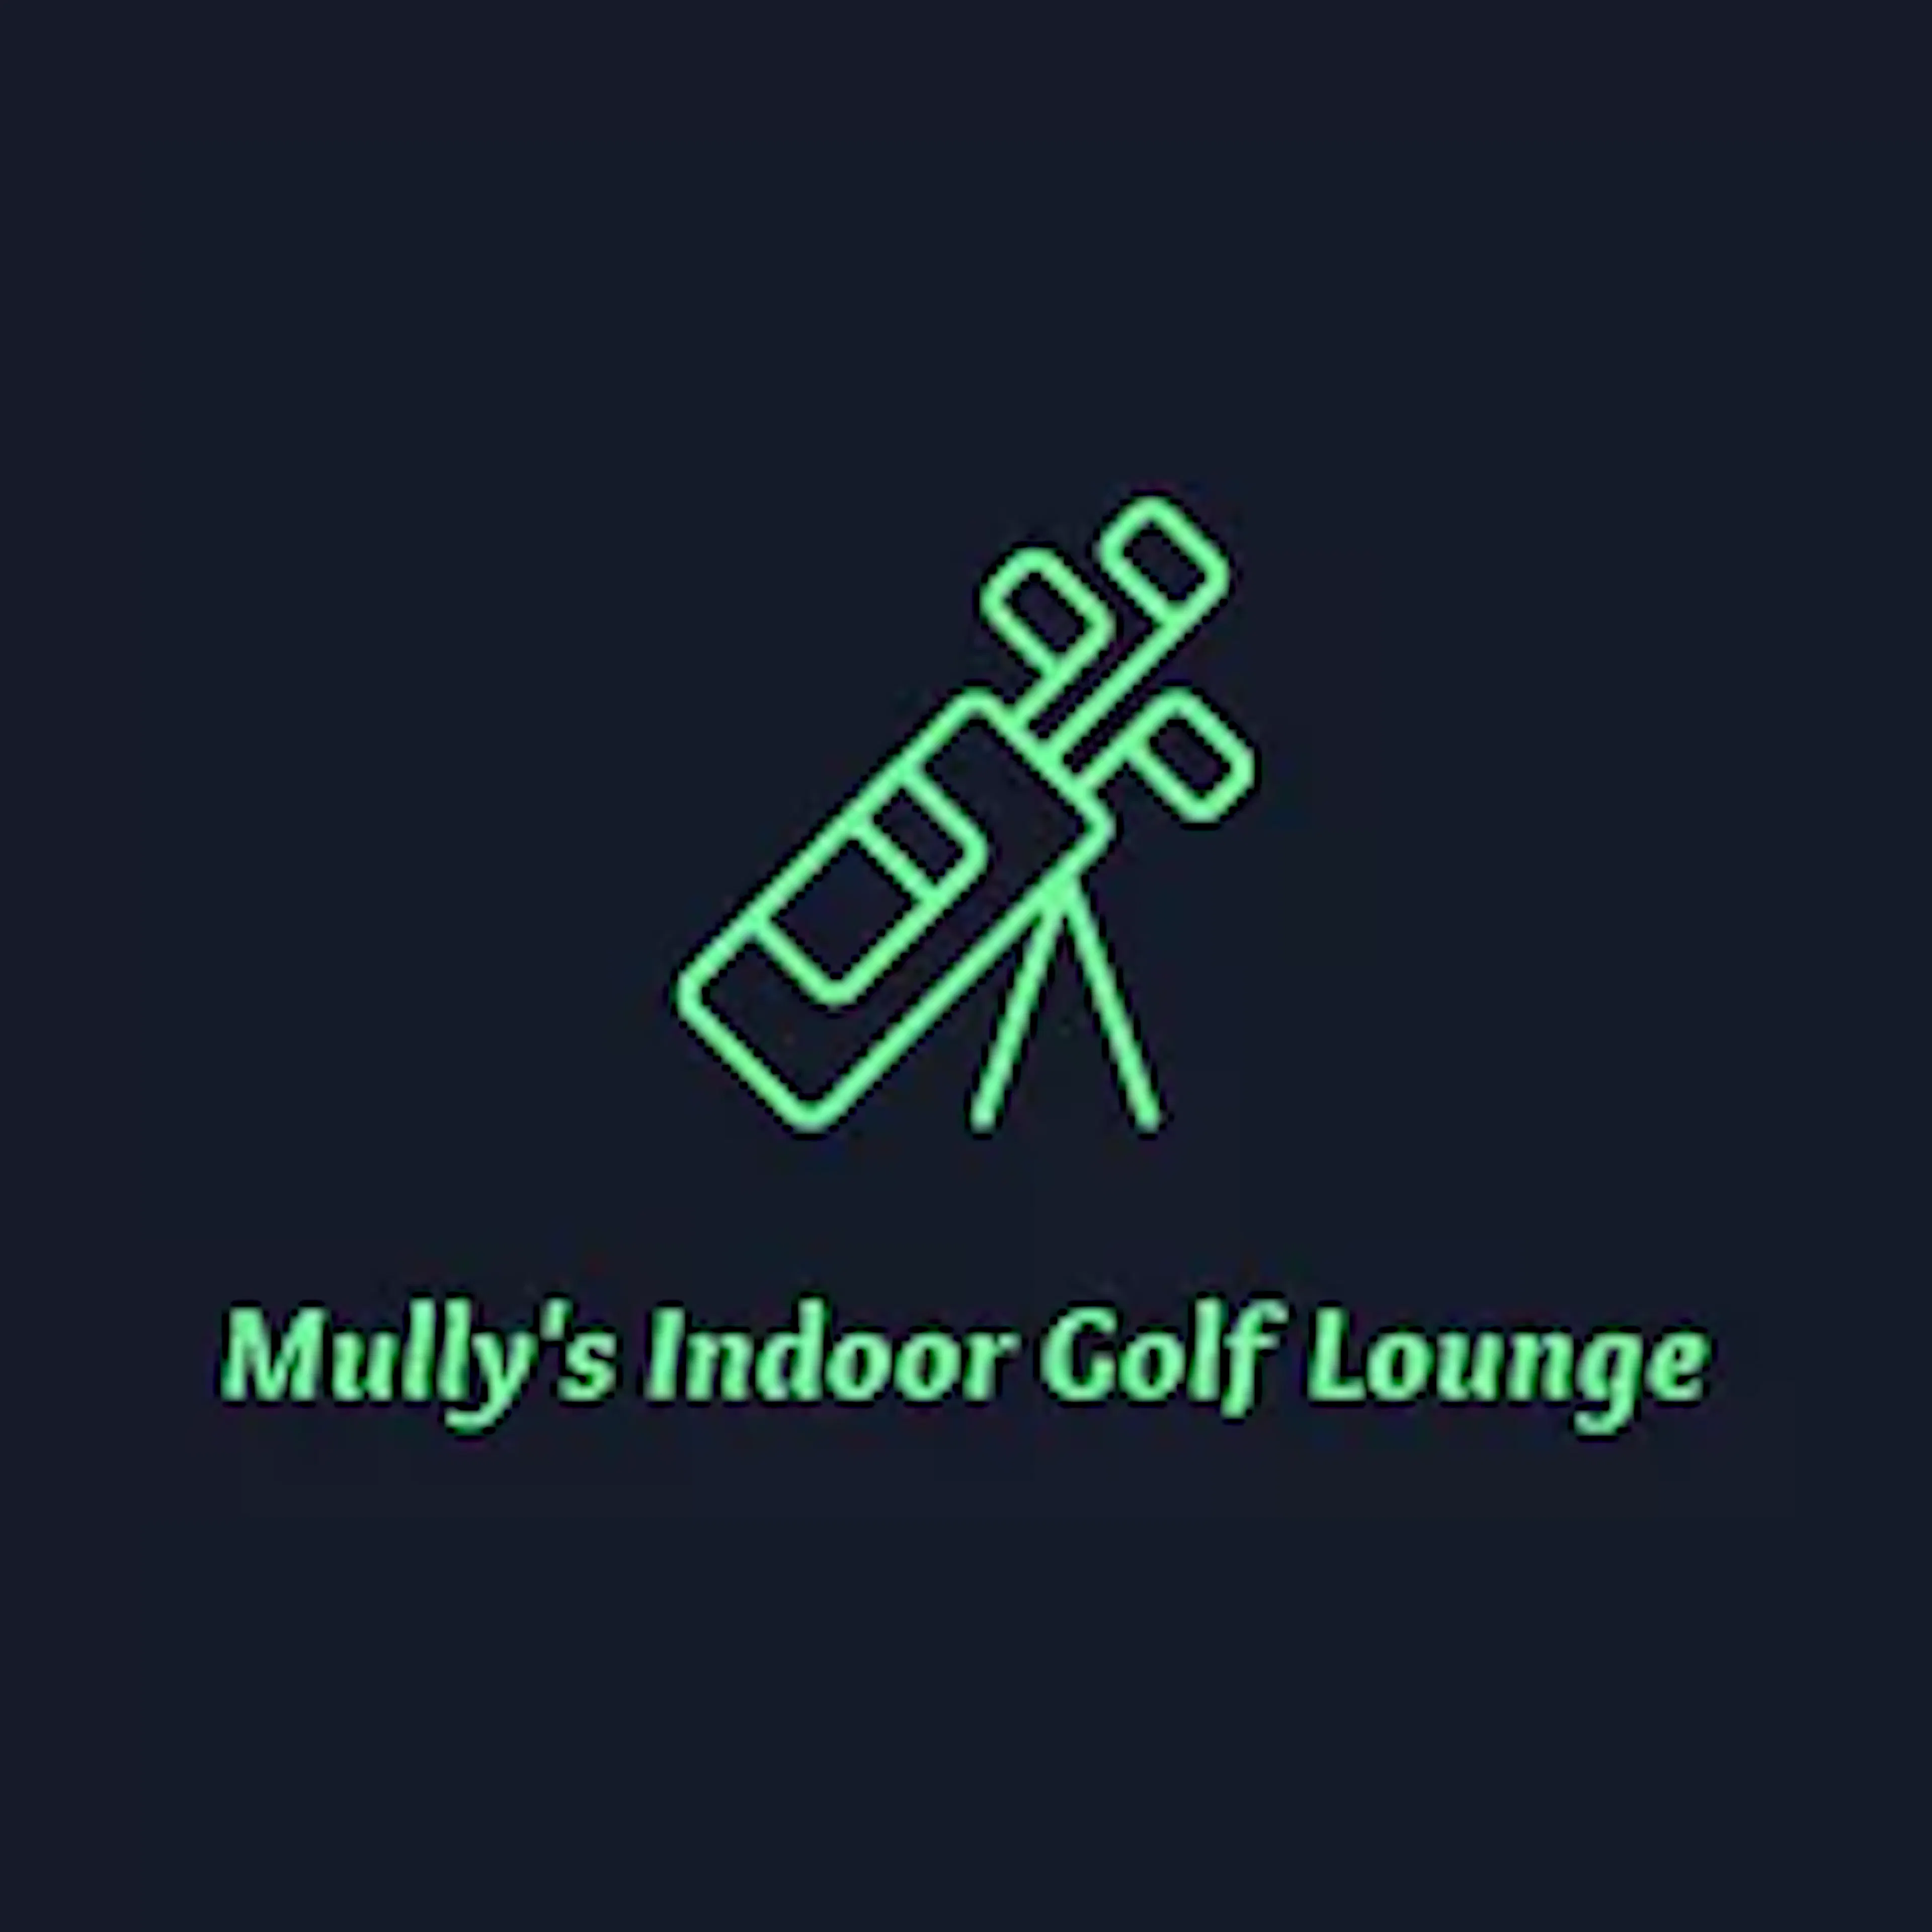 mully's indoor golf lounge